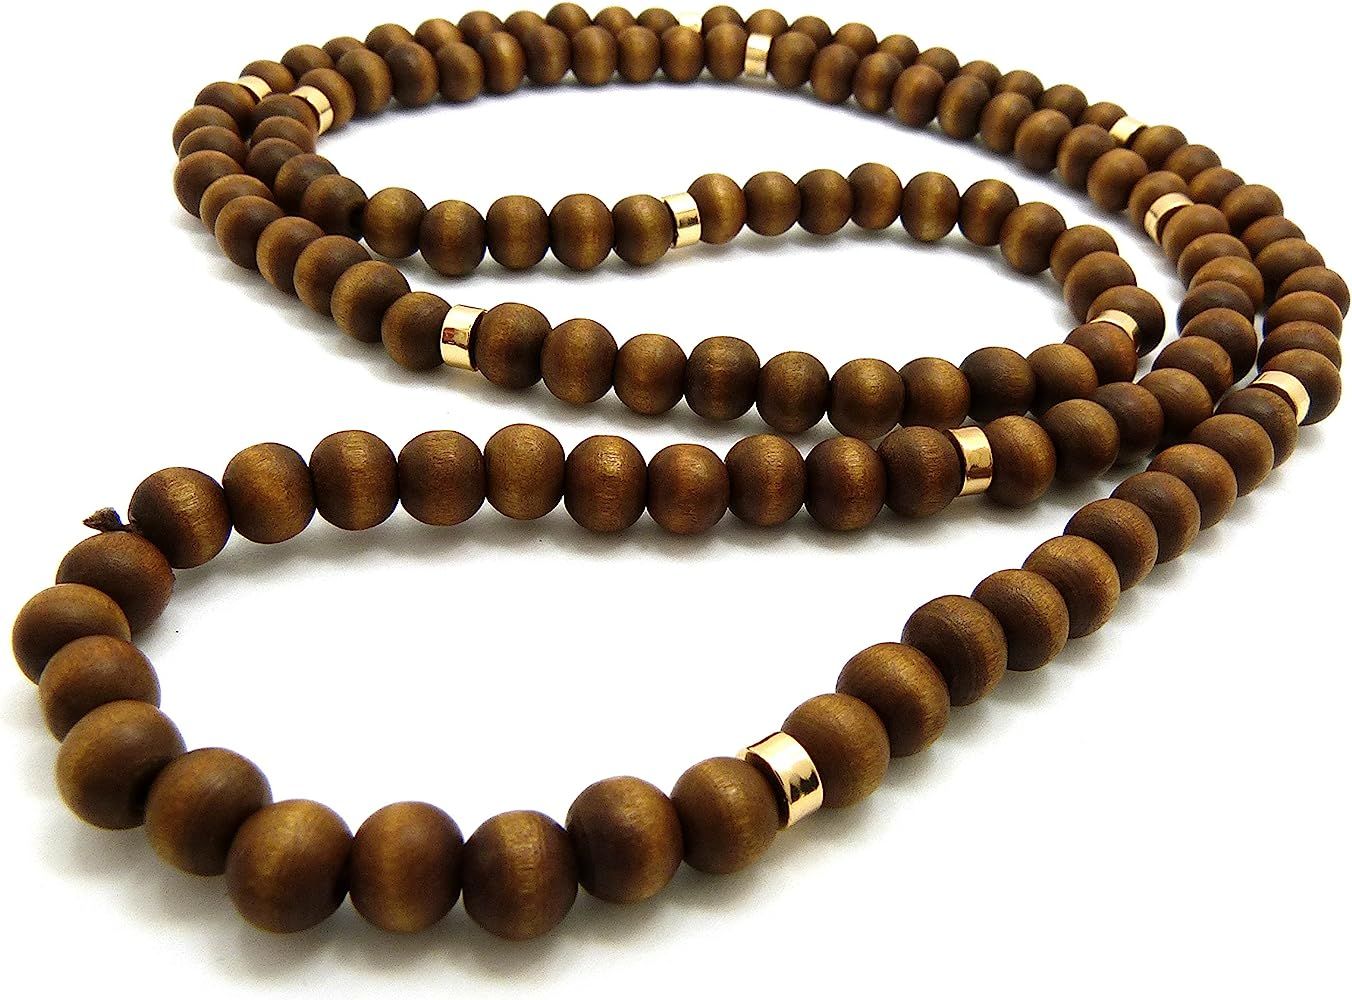 Fashion 21 Jet Black, Brown Tone 8mm 36" Wooden Bead Metal Connect Ball Bead Necklace | Amazon (US)